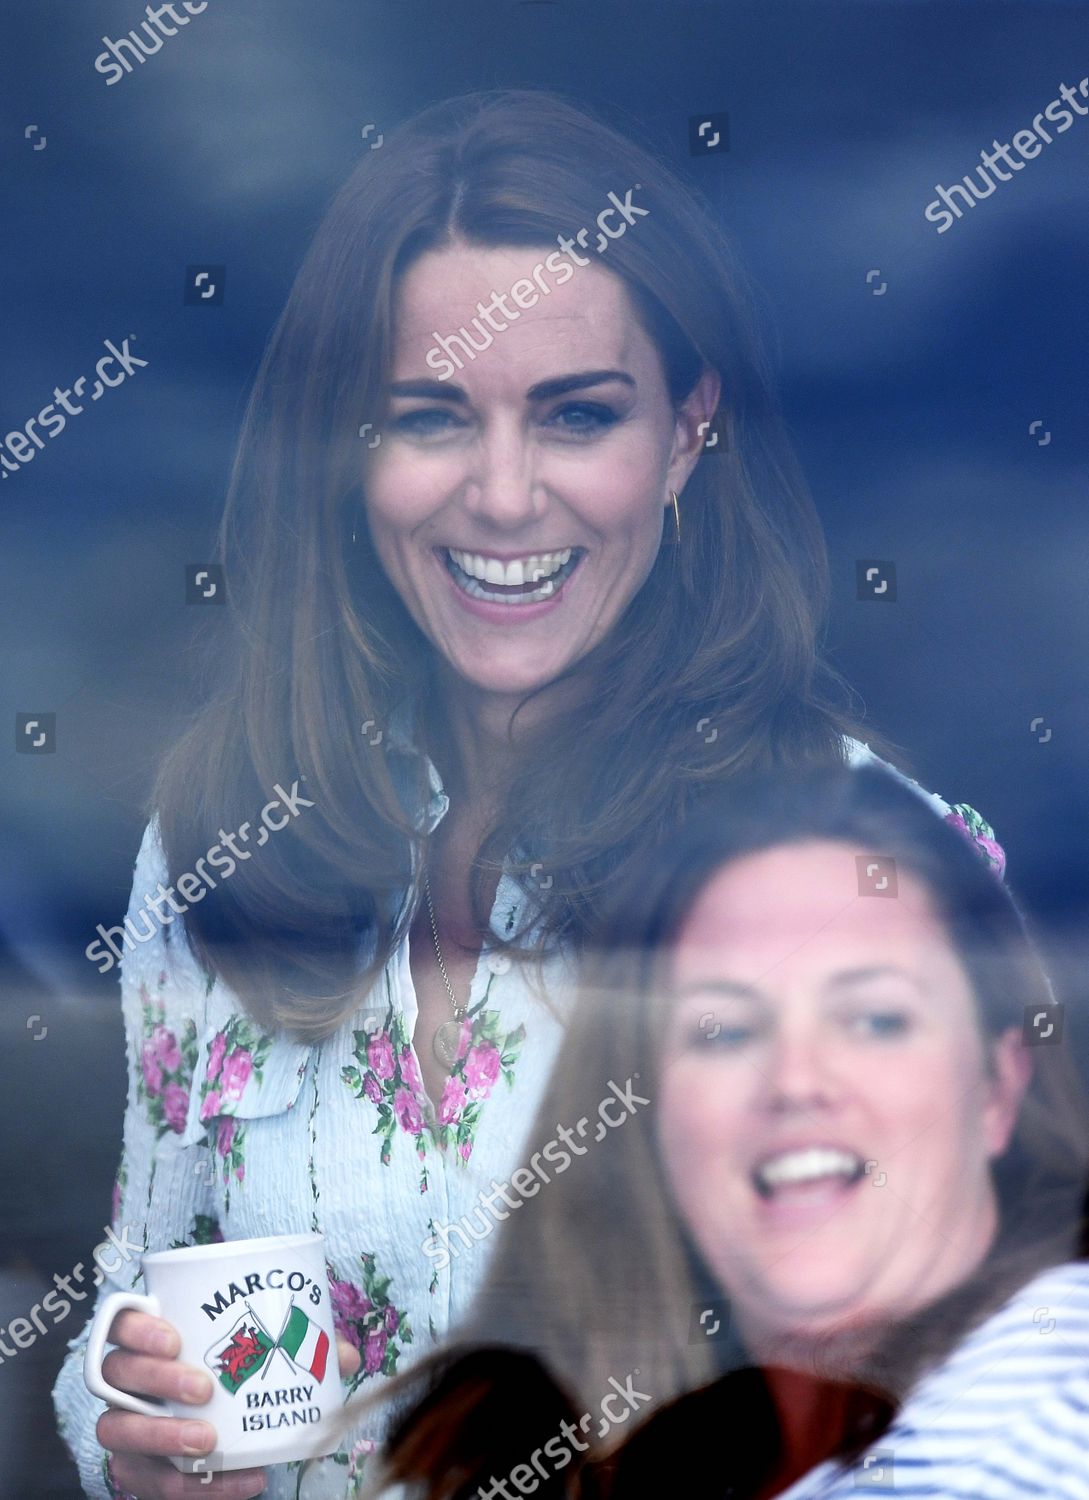 prince-william-and-catherine-duchess-of-cambridge-visit-to-barry-island-wales-uk-shutterstock-editorial-10733869ao.jpg